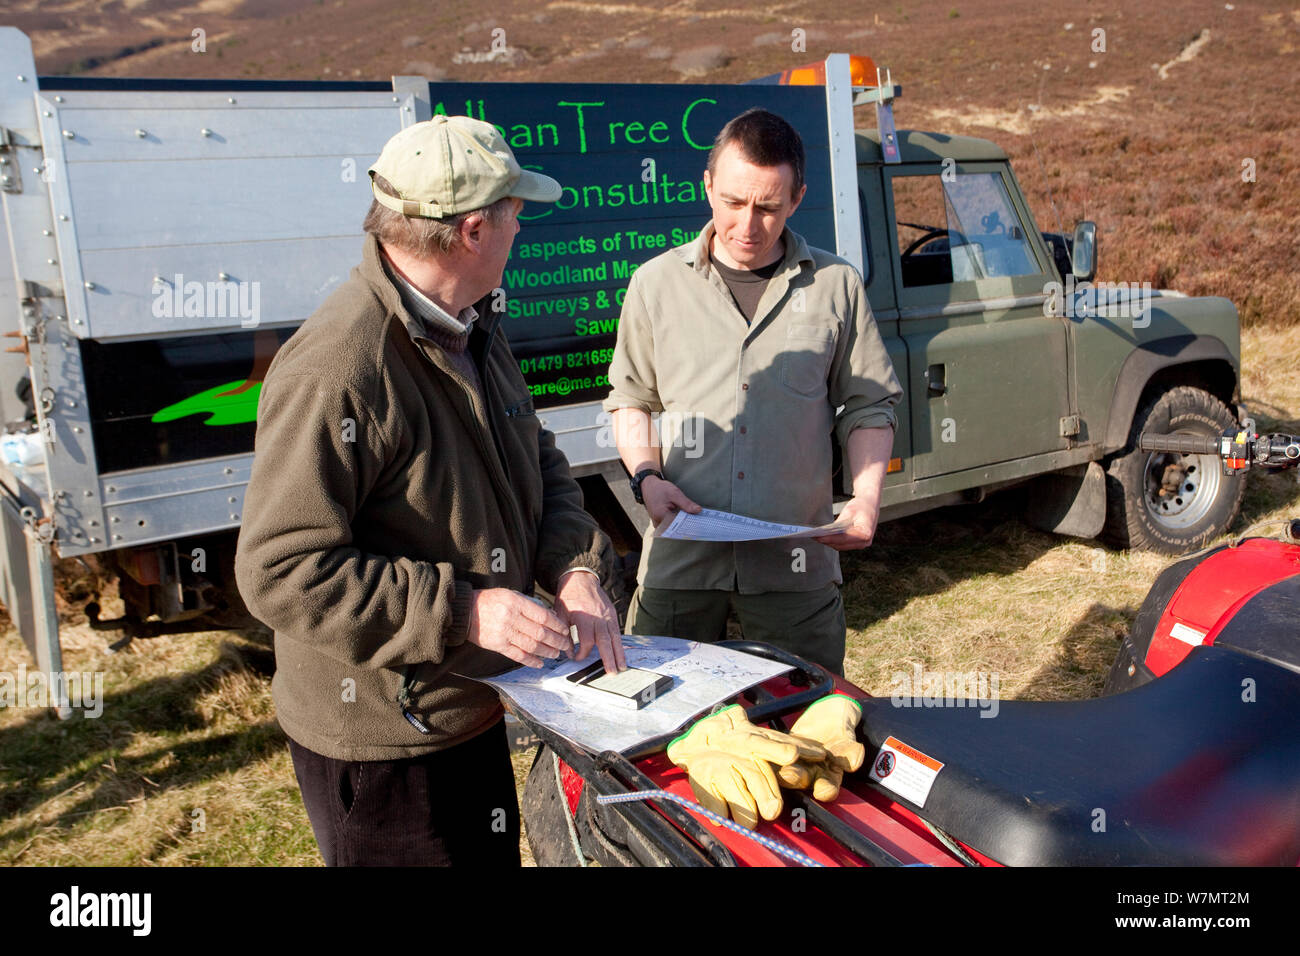 Des Dugan of RSPB discusses native tree planting at Abernethy Forest, Cairngorms National Park, Scotland, March 2012. Stock Photo